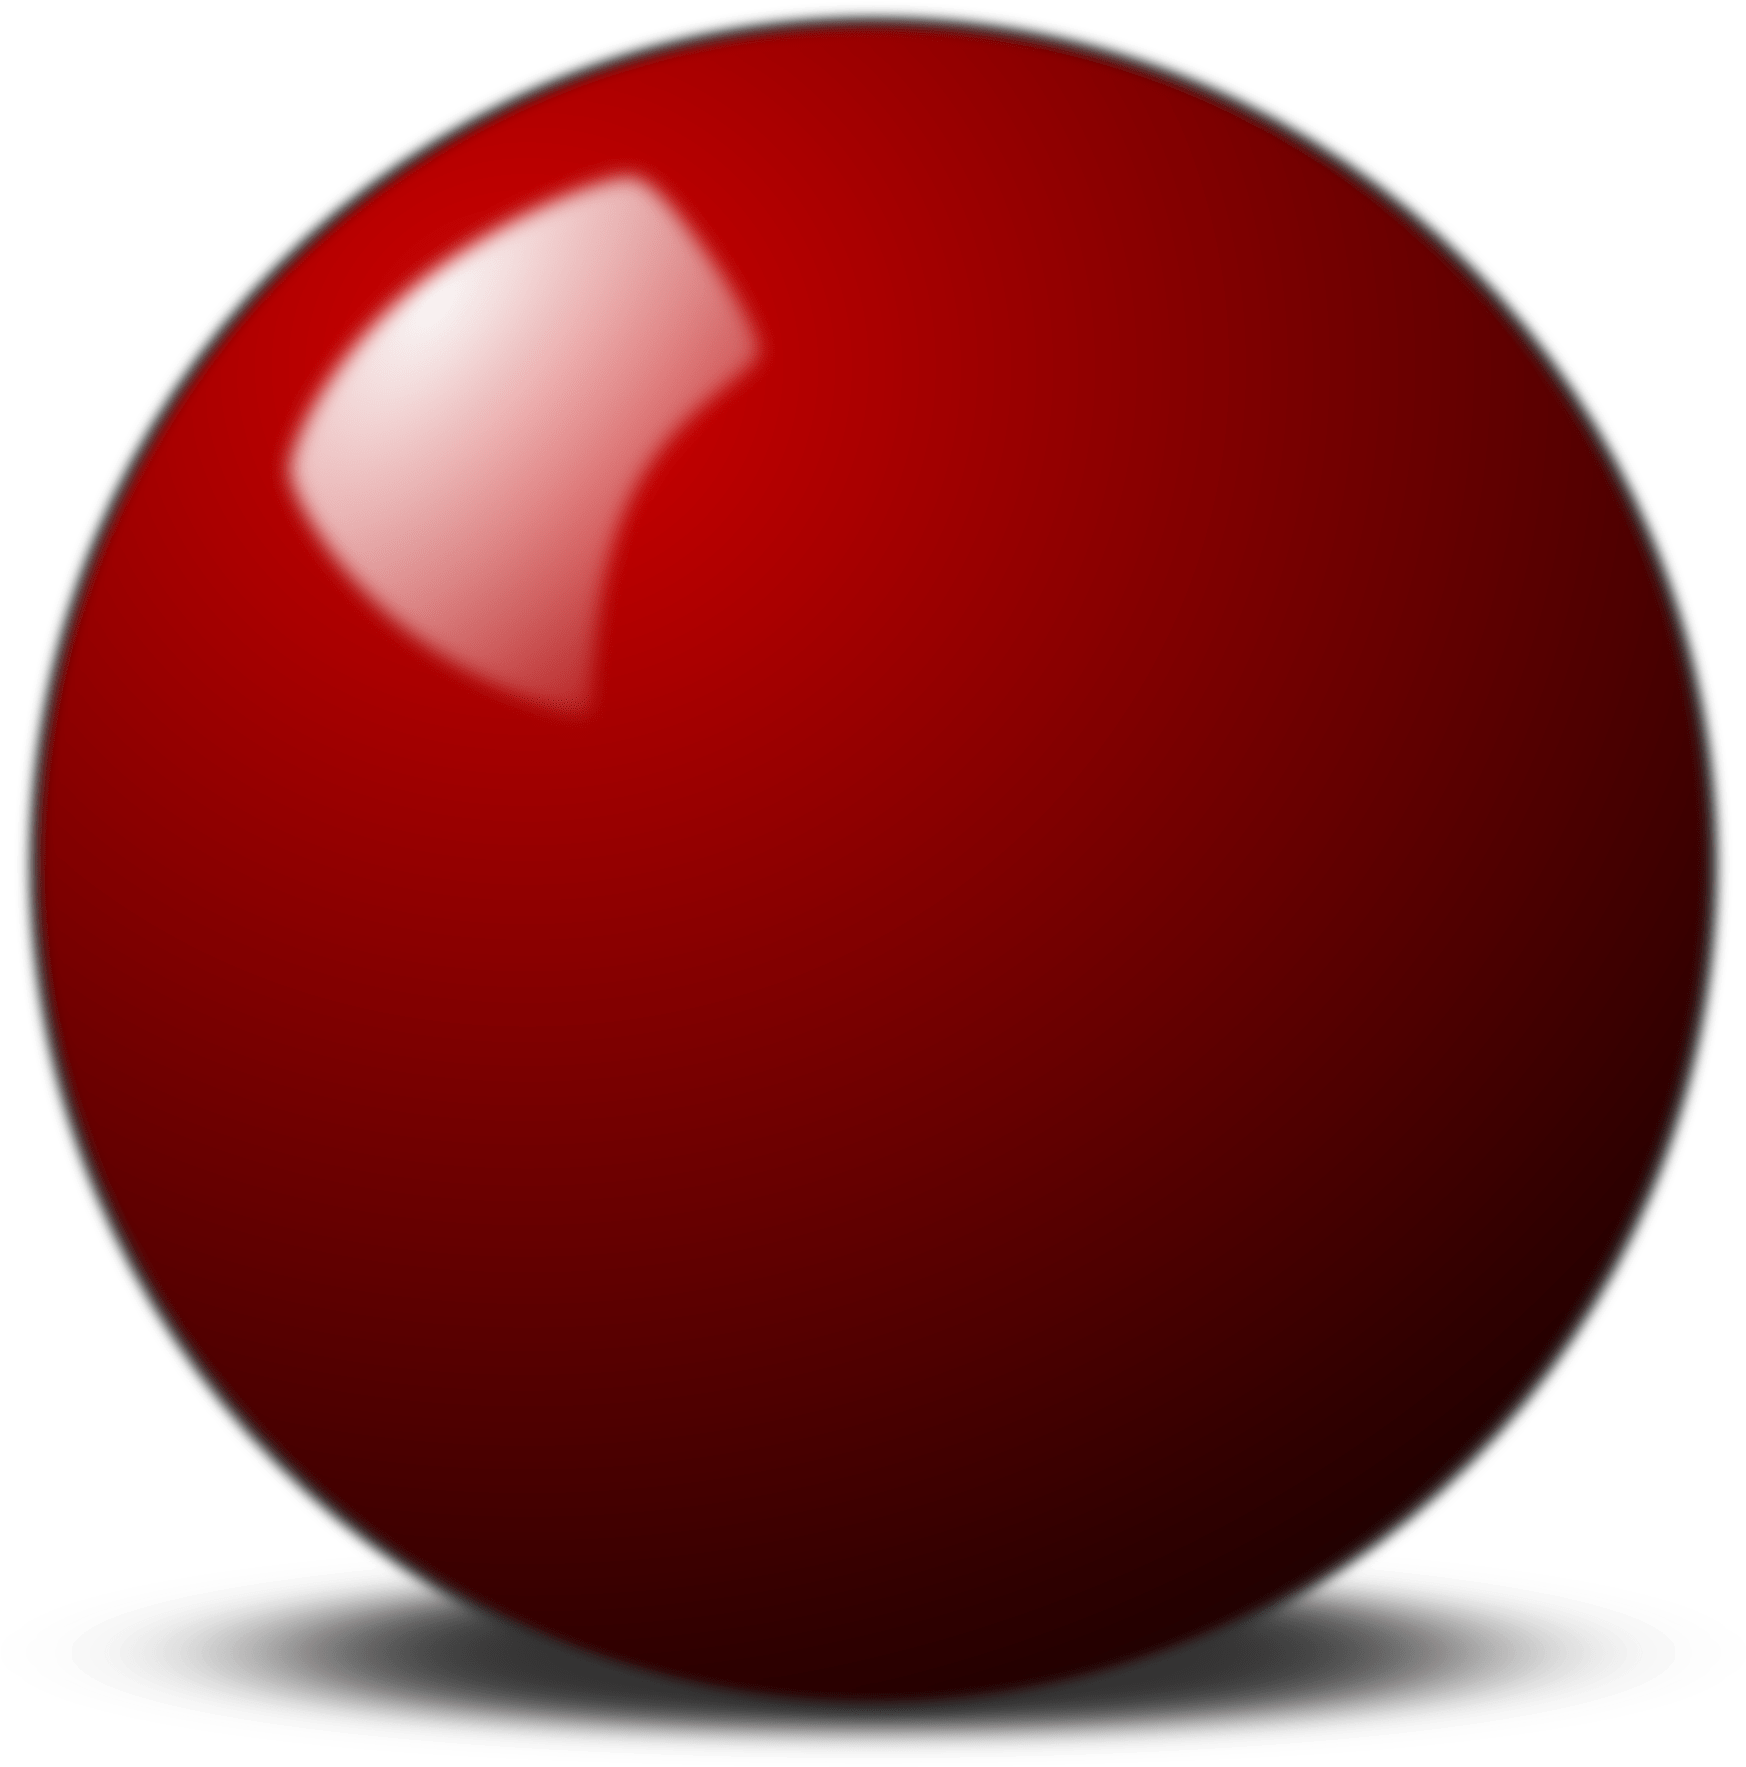 Red Snooker Ball Illustration PNG